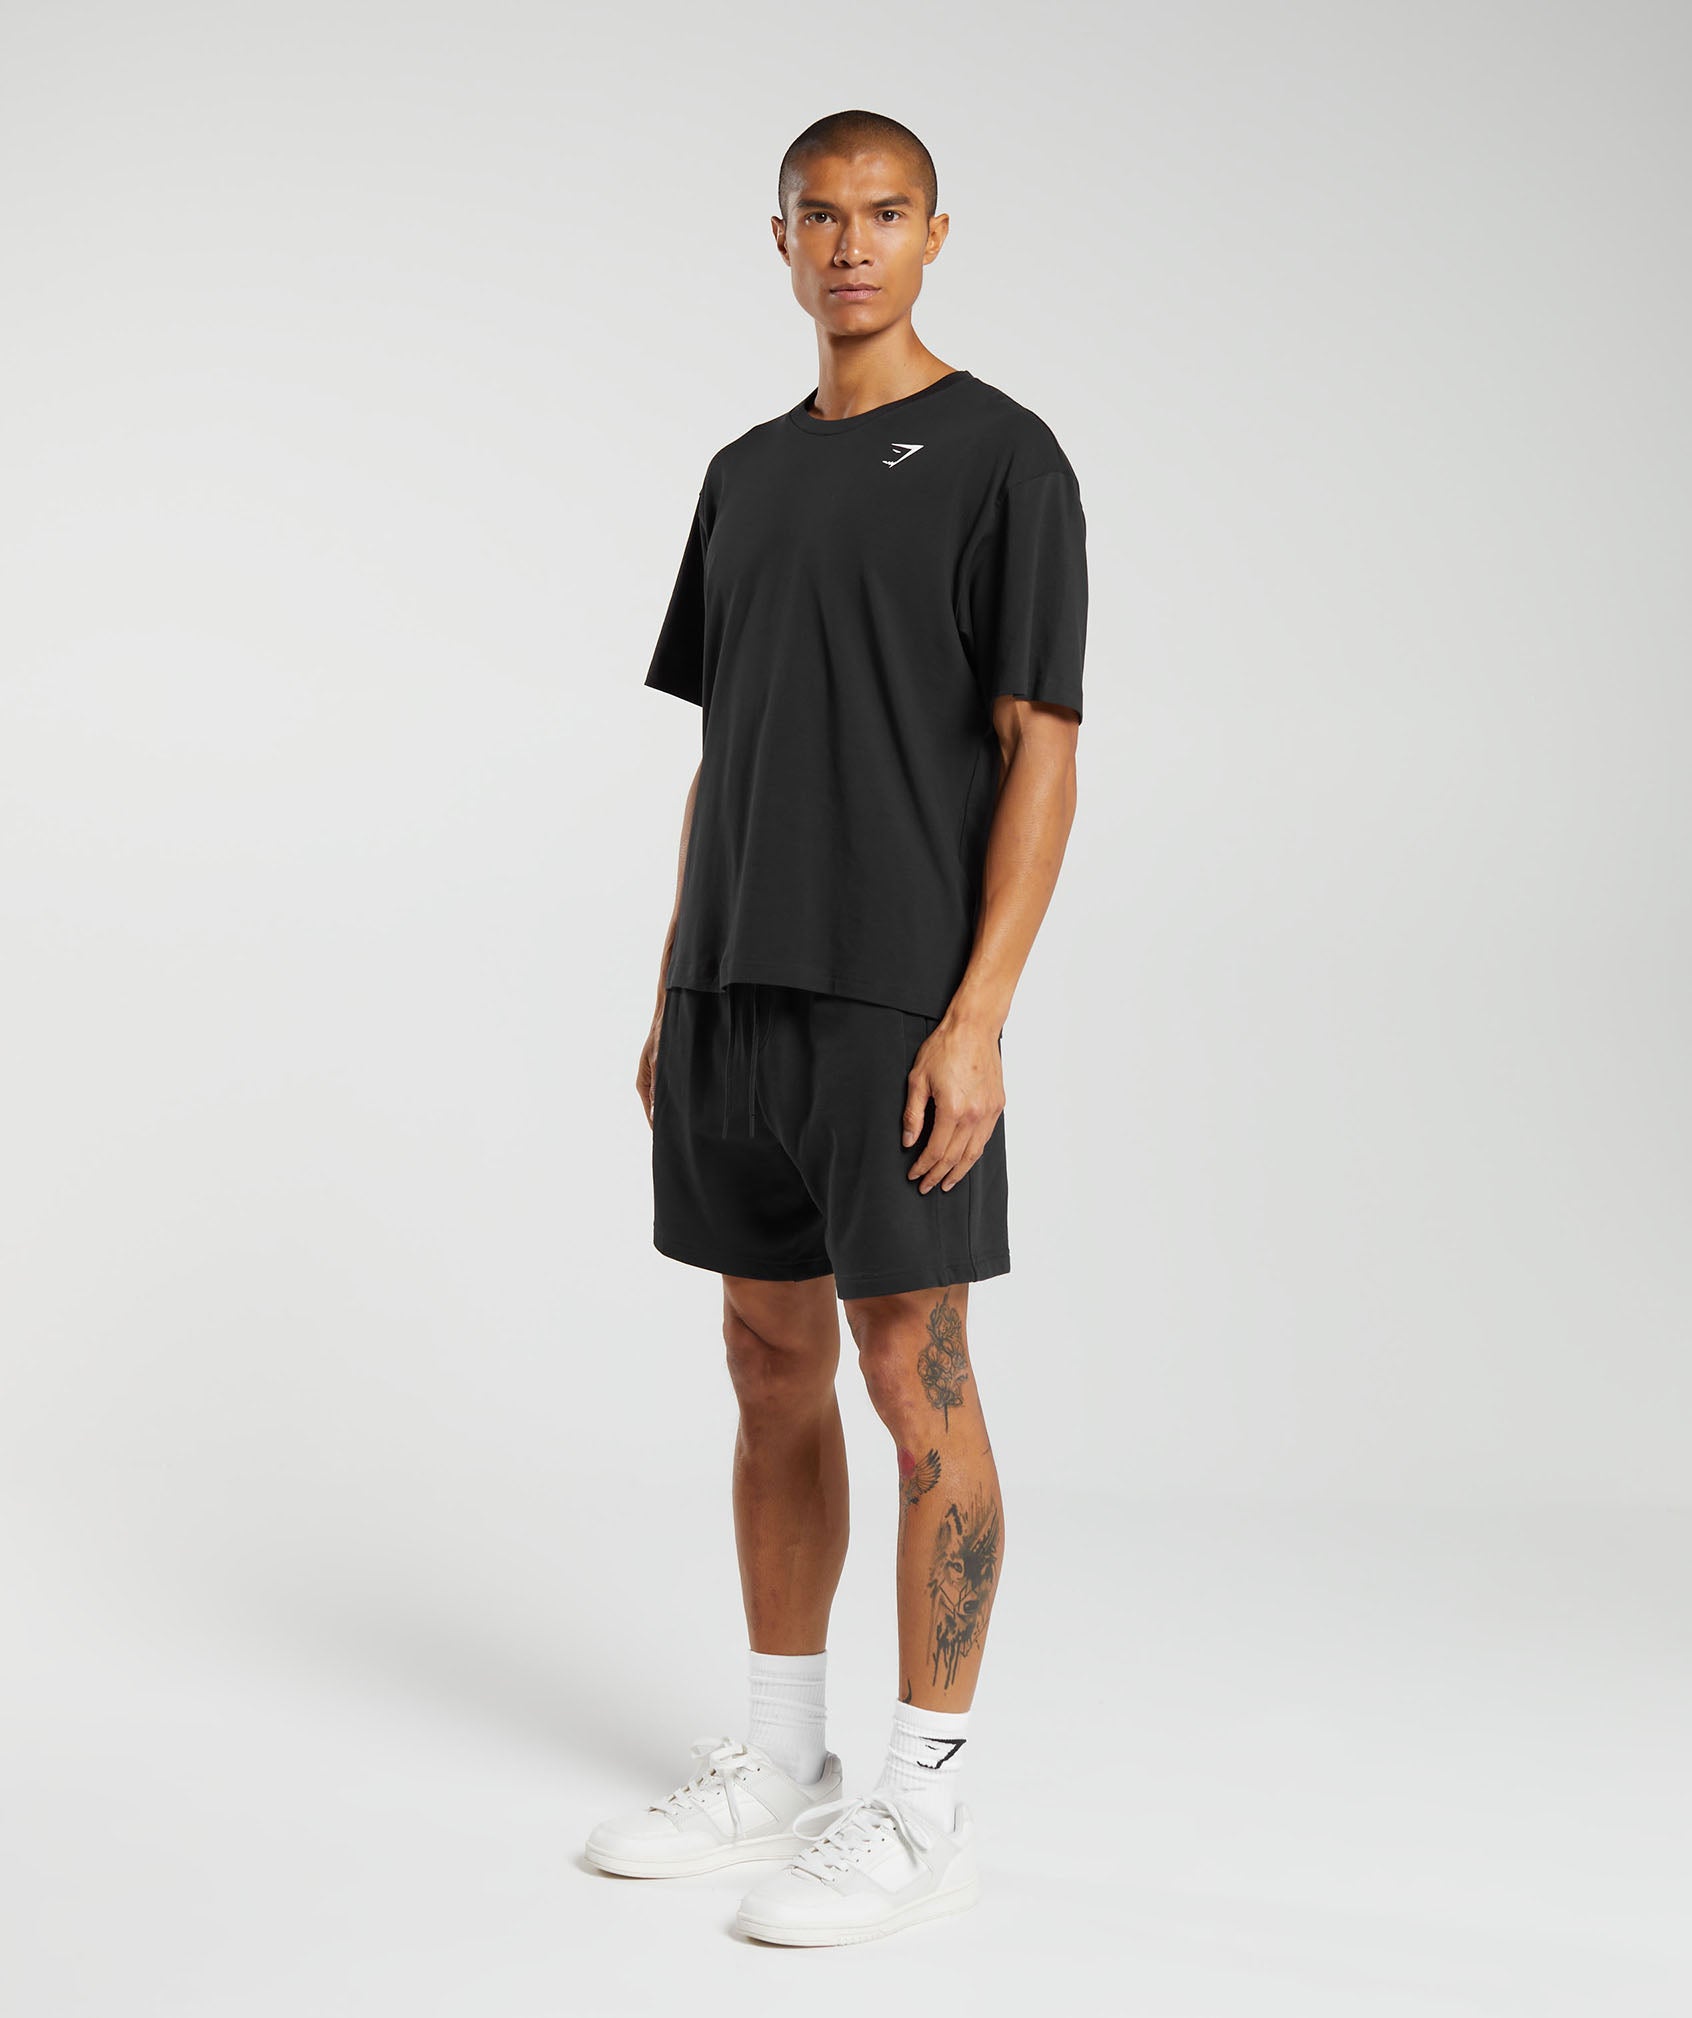 Essential Oversized T-Shirt in Black - view 4